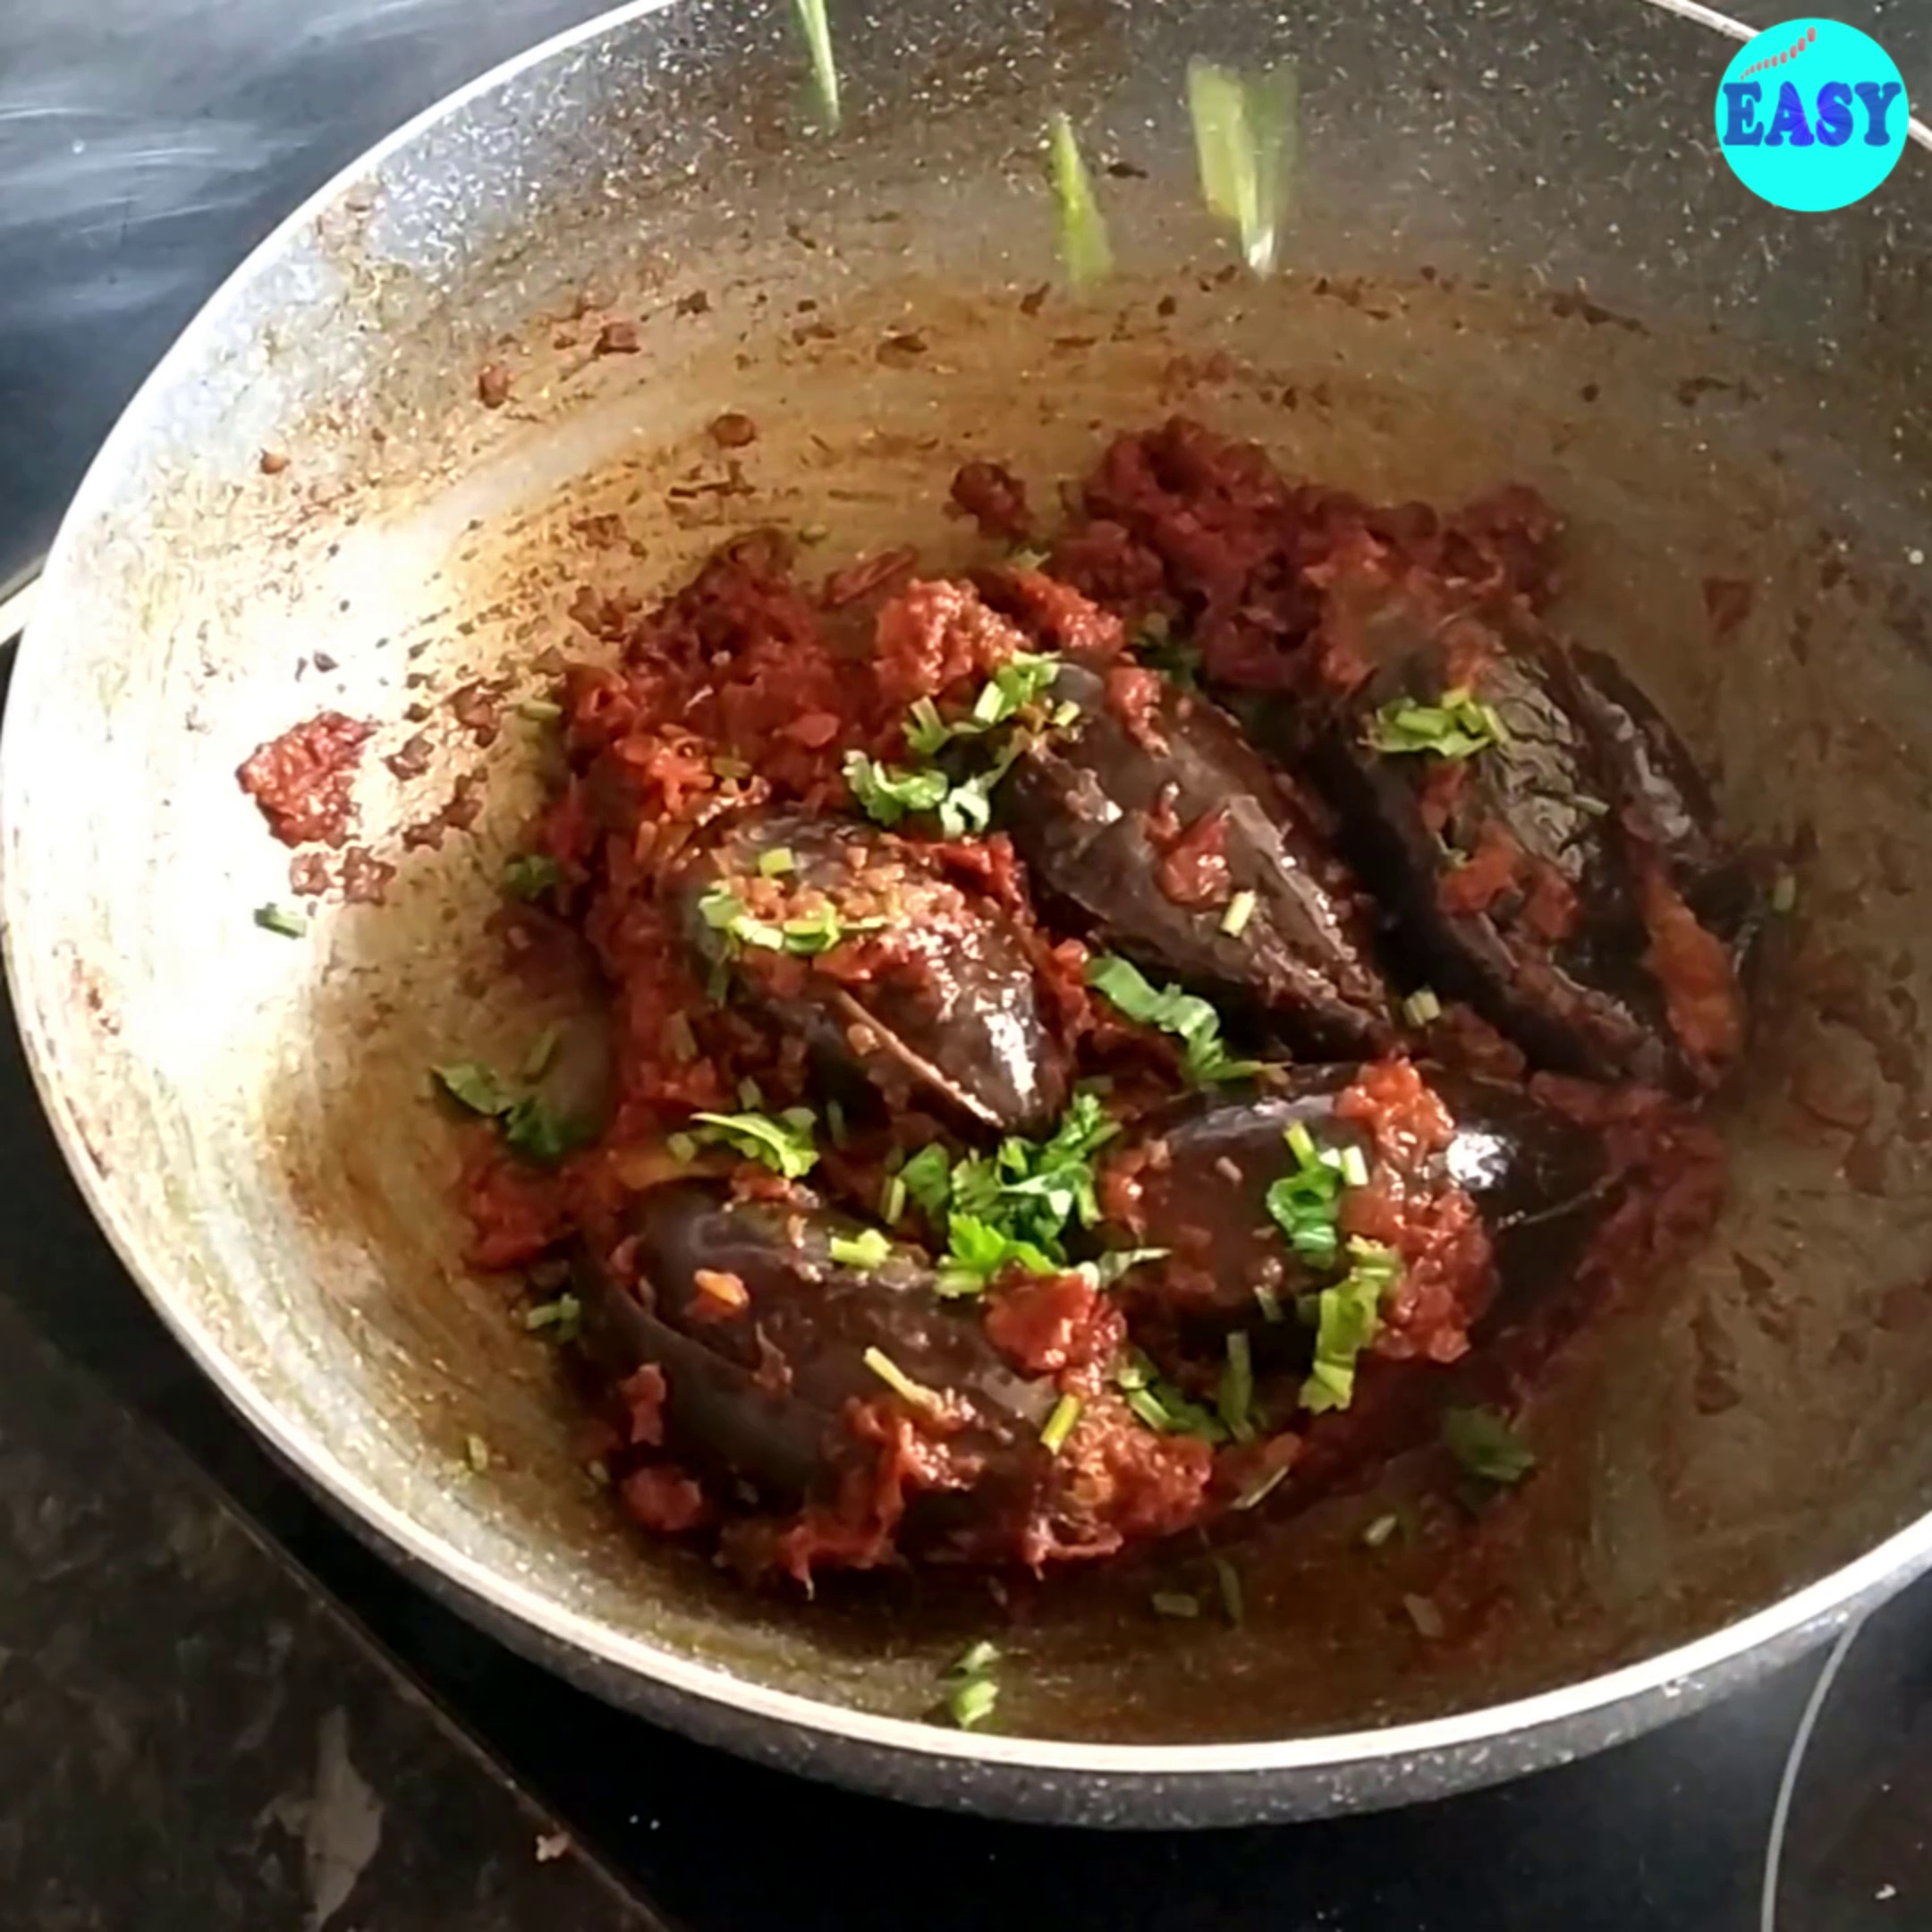 Step 12 - Once brinjals are tender switch of the flame and add chopped coriander leaves.